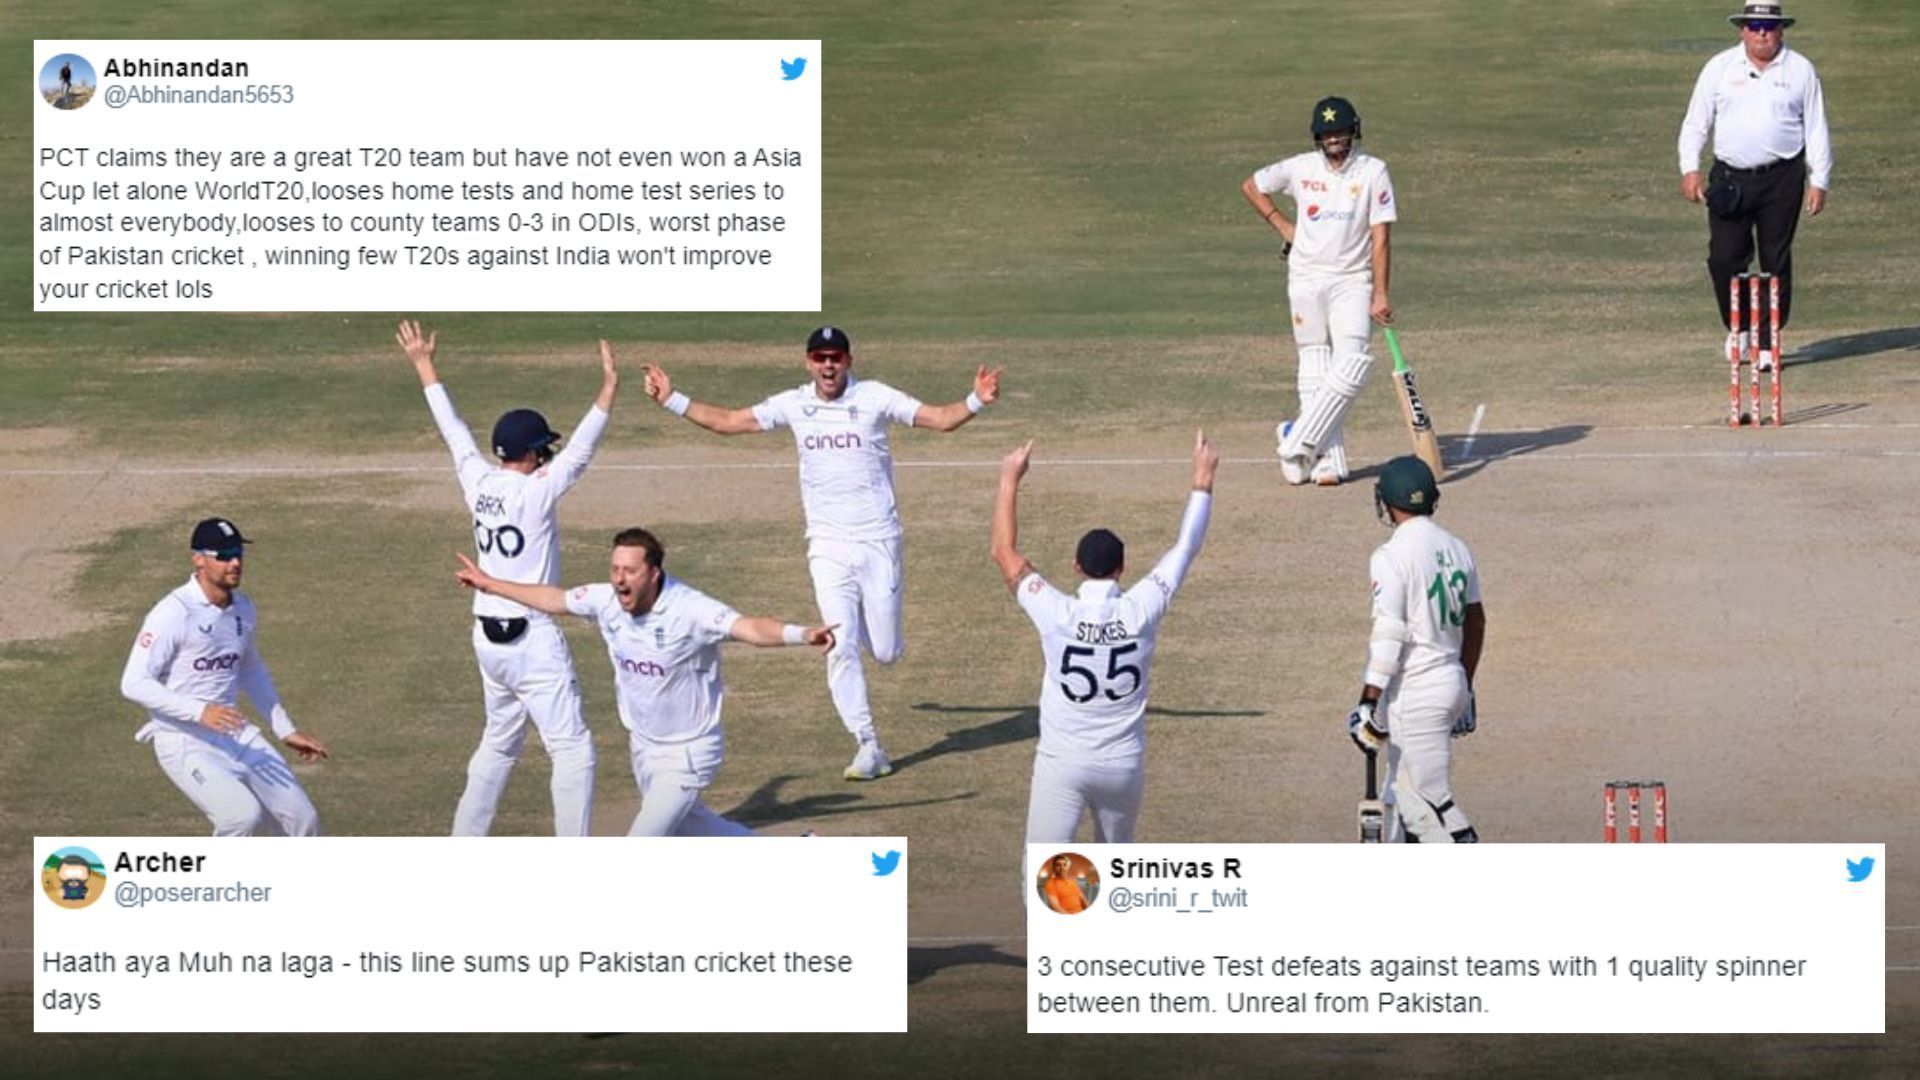 Ollie Robinson and other England players celebrate after England beat Pakistan in Multan. (P.C.:Twitter)